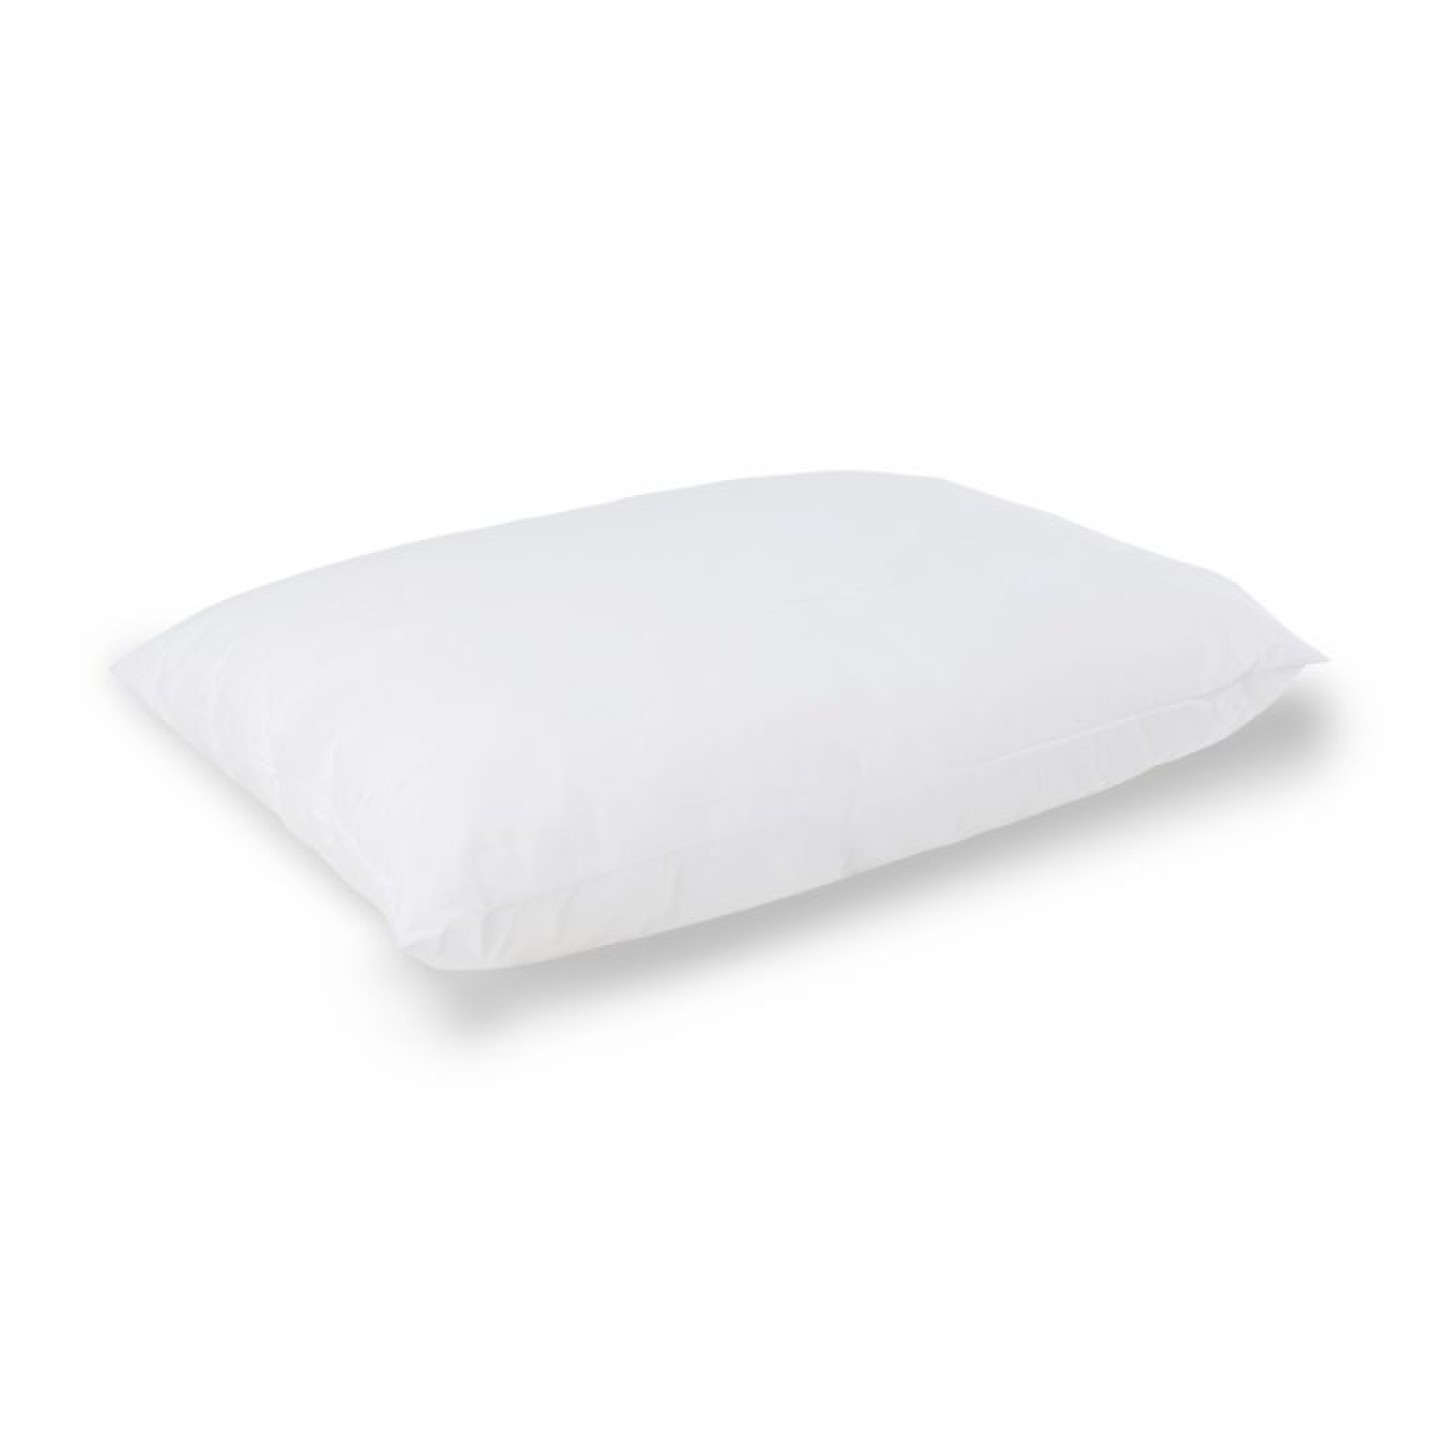 THE UGLY DUCKLING 650gr PILLOW